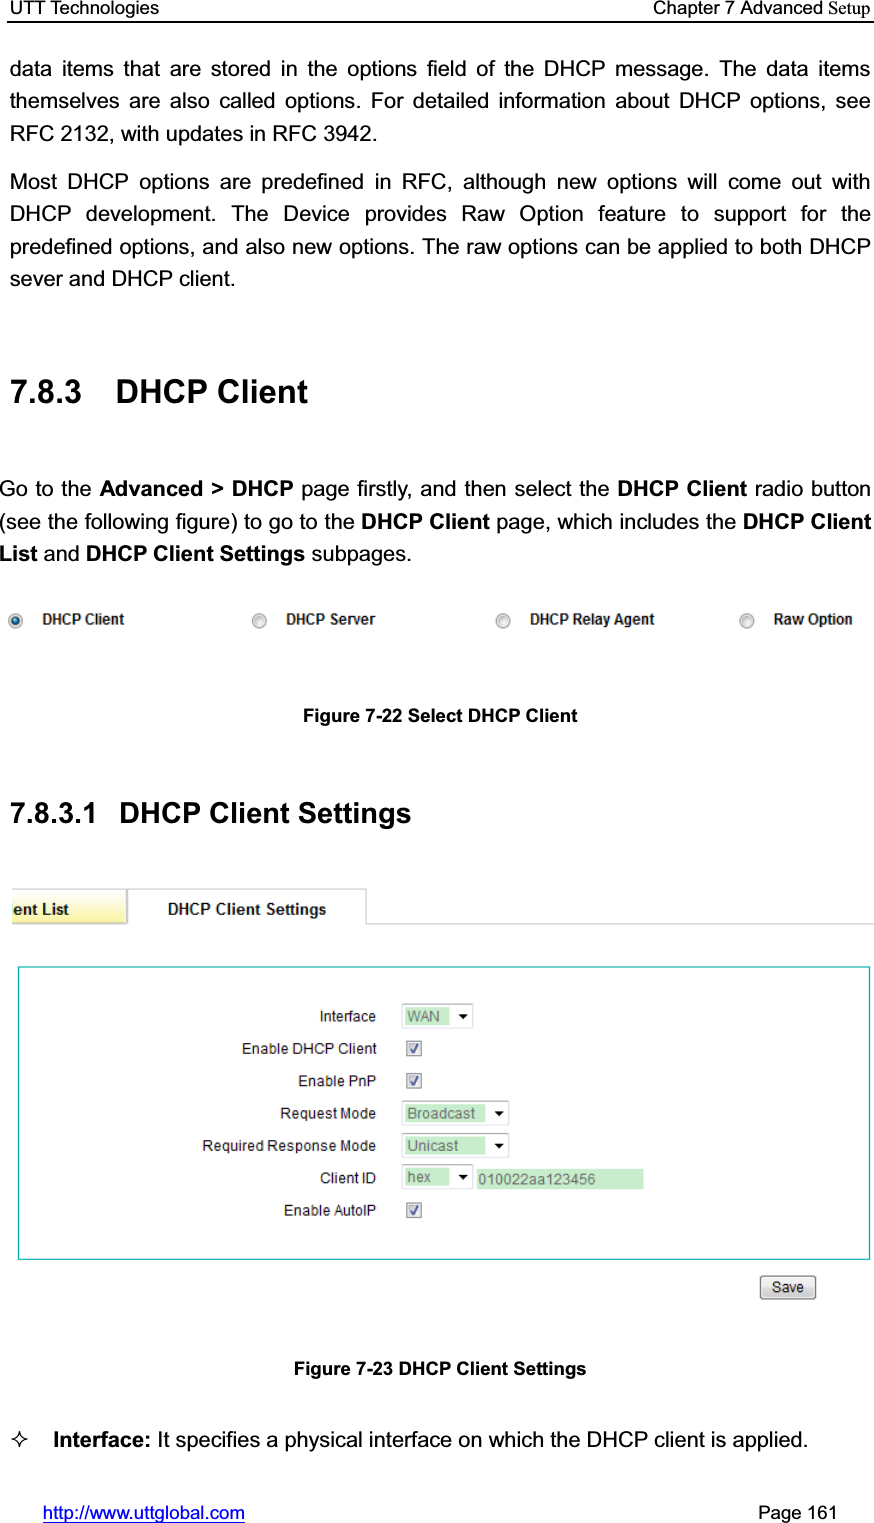 UTT Technologies    Chapter 7 Advanced Setuphttp://www.uttglobal.com                                                       Page 161 data items that are stored in the options field of the DHCP message. The data items themselves are also called options. For detailed information about DHCP options, see RFC 2132, with updates in RFC 3942. Most DHCP options are predefined in RFC, although new options will come out with DHCP development. The Device provides Raw Option feature to support for the predefined options, and also new options. The raw options can be applied to both DHCP sever and DHCP client. 7.8.3 DHCP Client Go to the Advanced &gt; DHCP page firstly, and then select the DHCP Client radio button (see the following figure) to go to the DHCP Client page, which includes the DHCP Client List and DHCP Client Settings subpages. Figure 7-22 Select DHCP Client 7.8.3.1 DHCP Client Settings  Figure 7-23 DHCP Client Settings Interface: It specifies a physical interface on which the DHCP client is applied. 